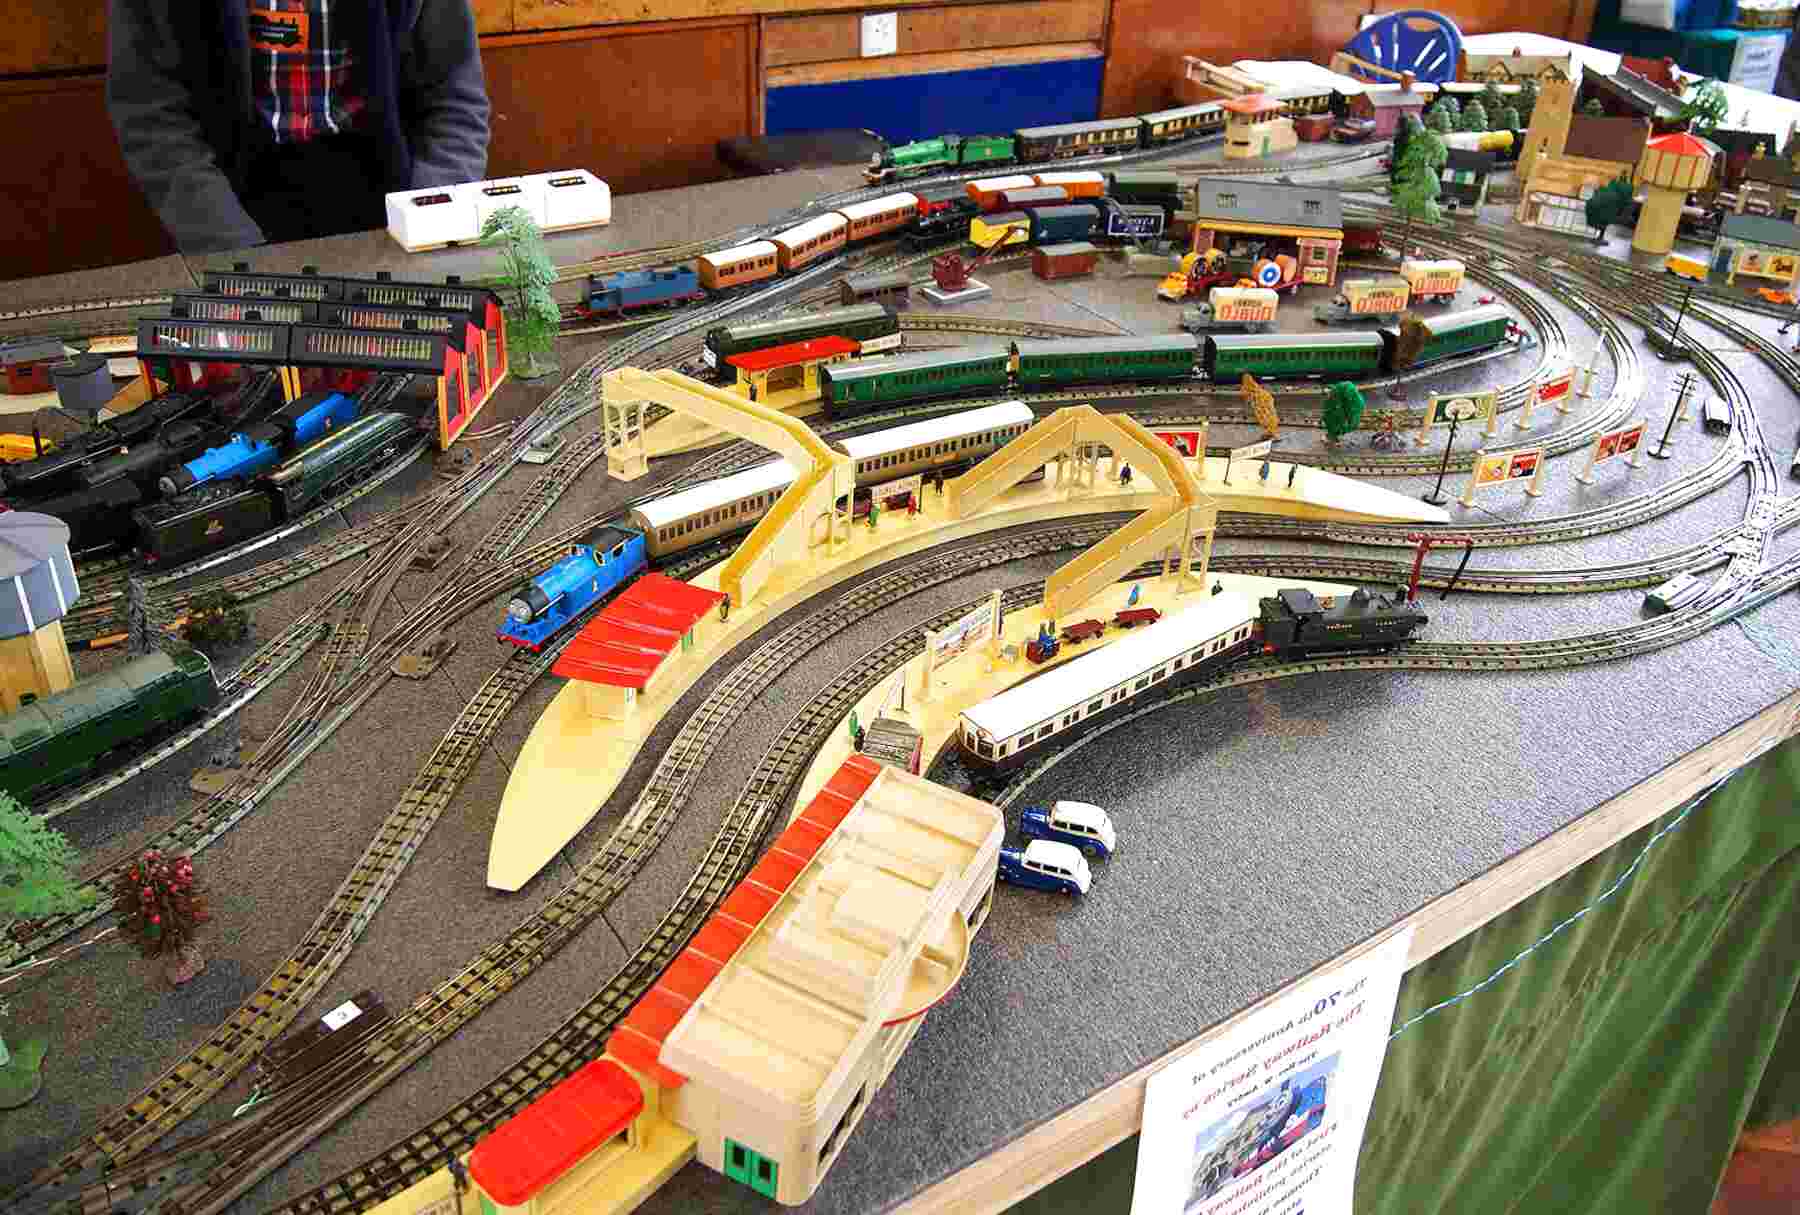 hornby 00 train sets for sale